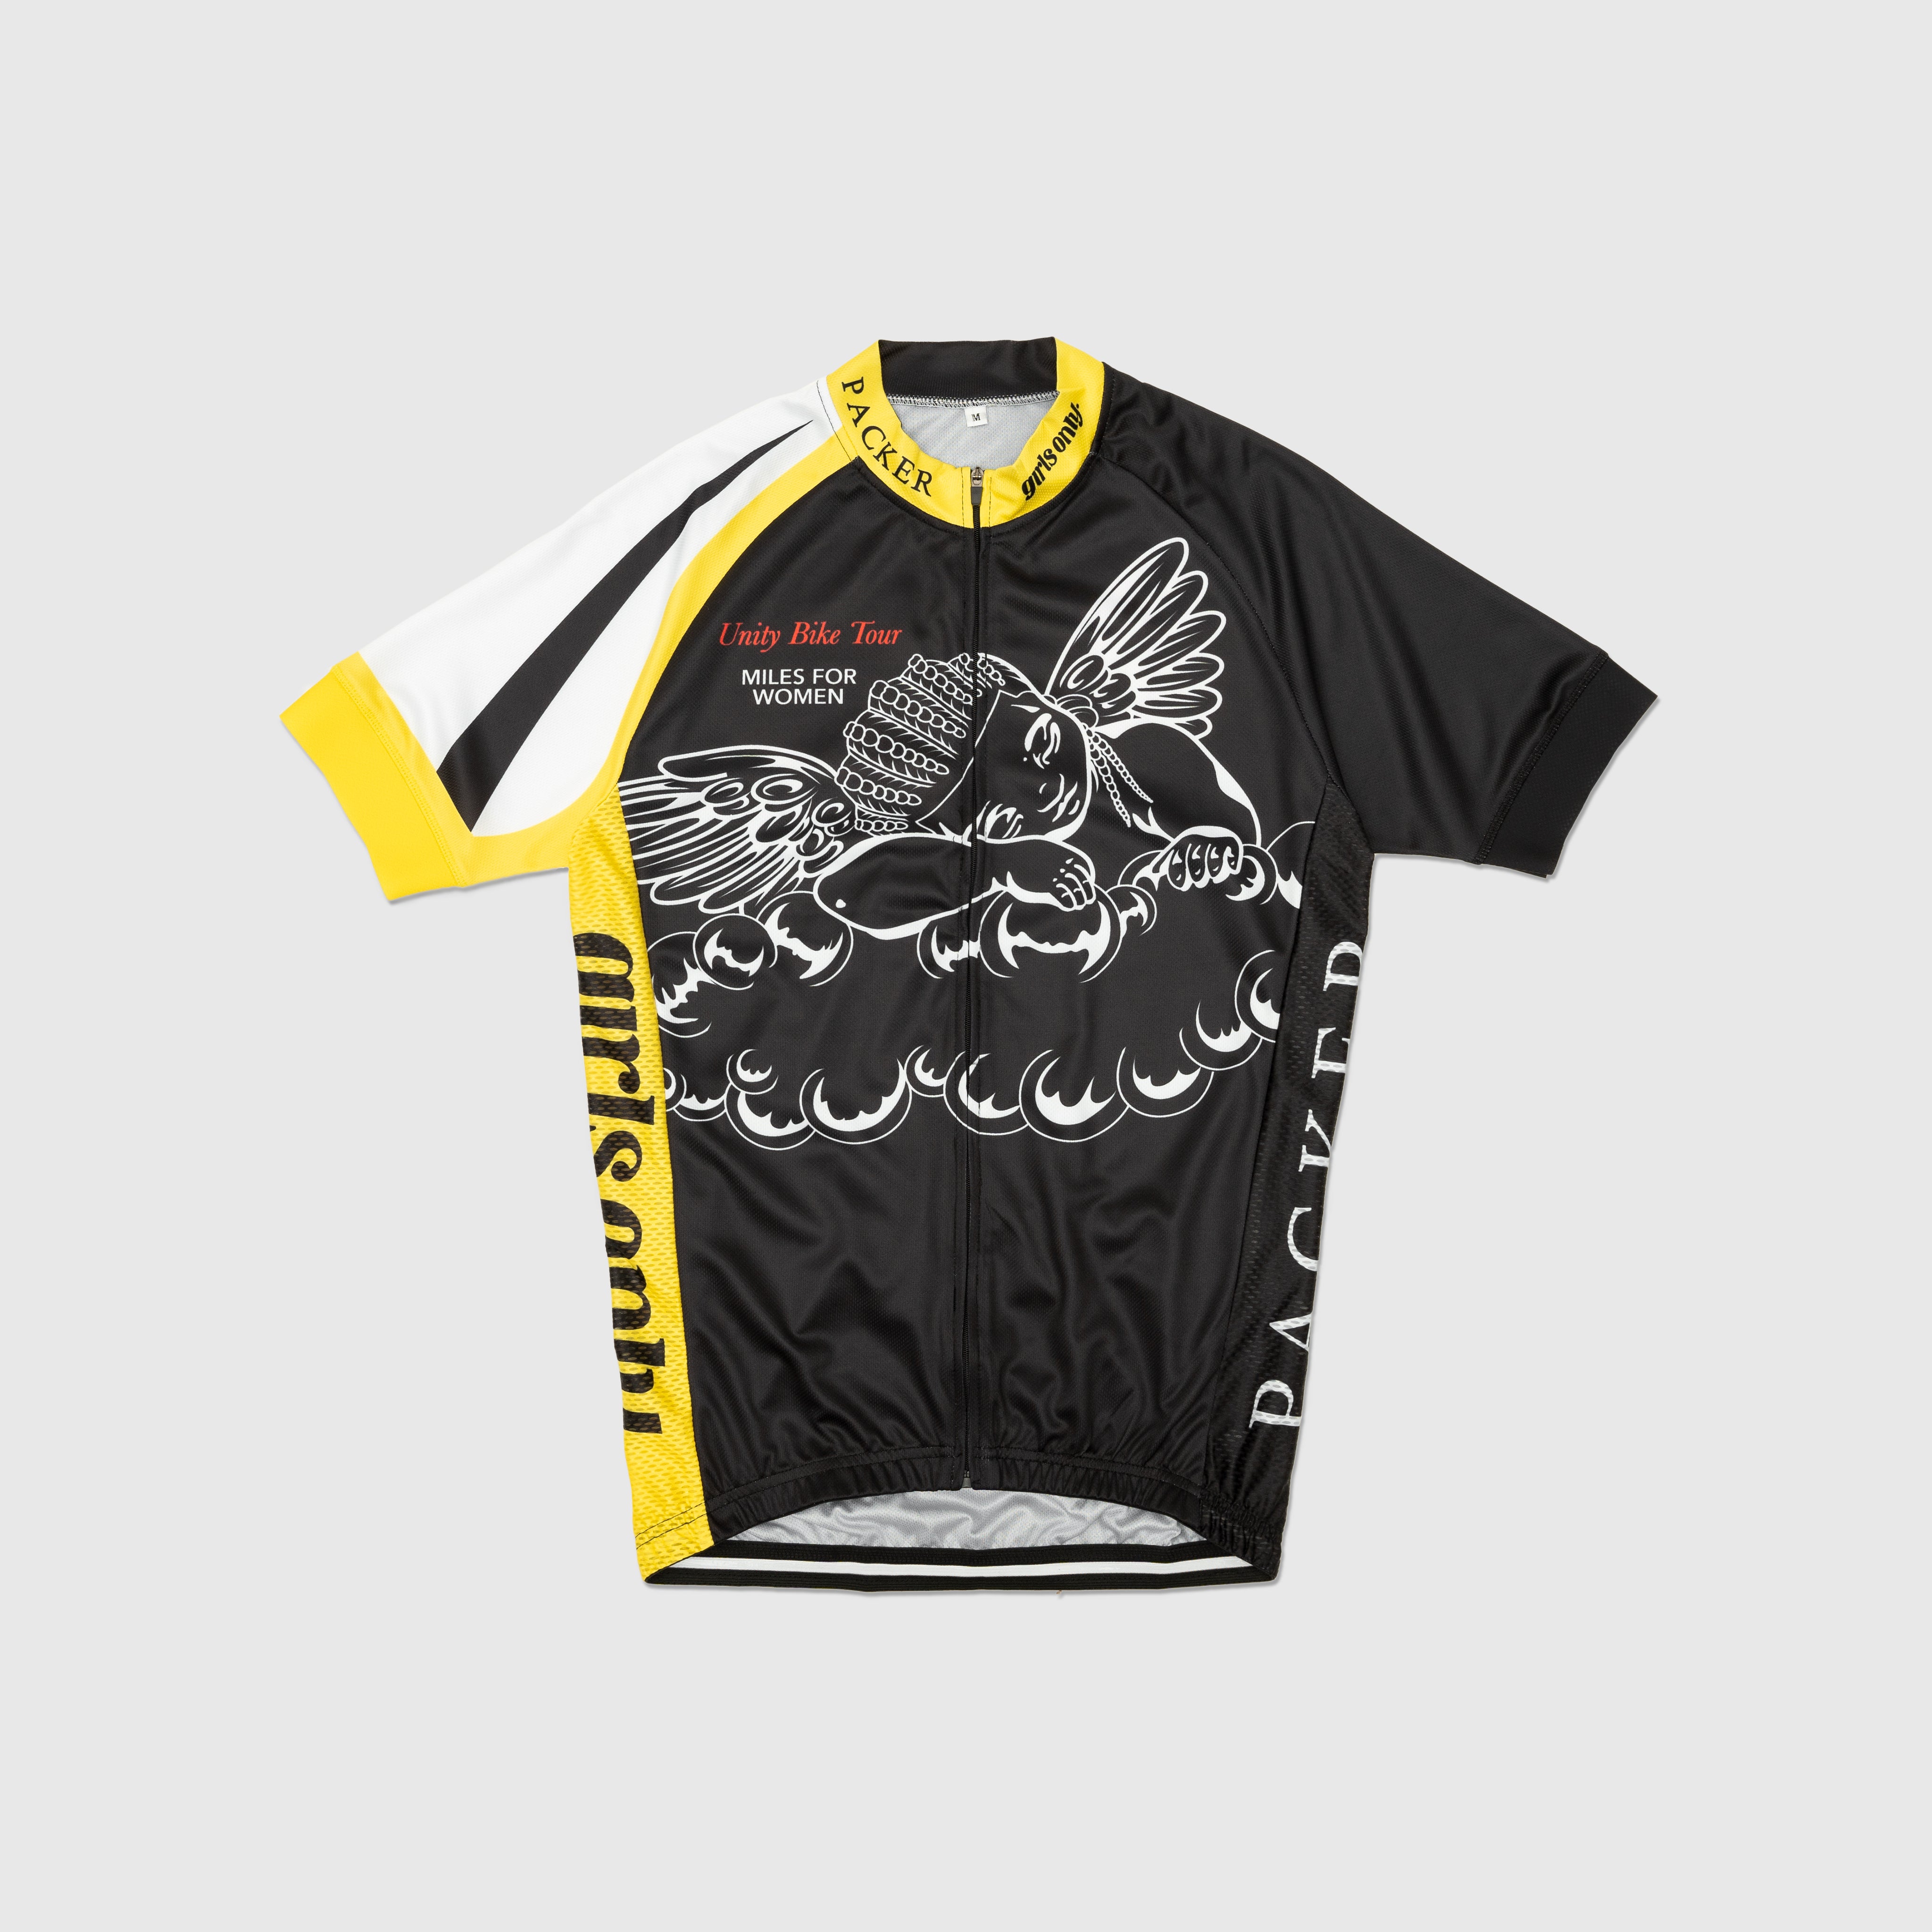 AnthonyantonellisShops X GIRLS ONLY UNITY BIKE TOUR CYCLING JERSEY